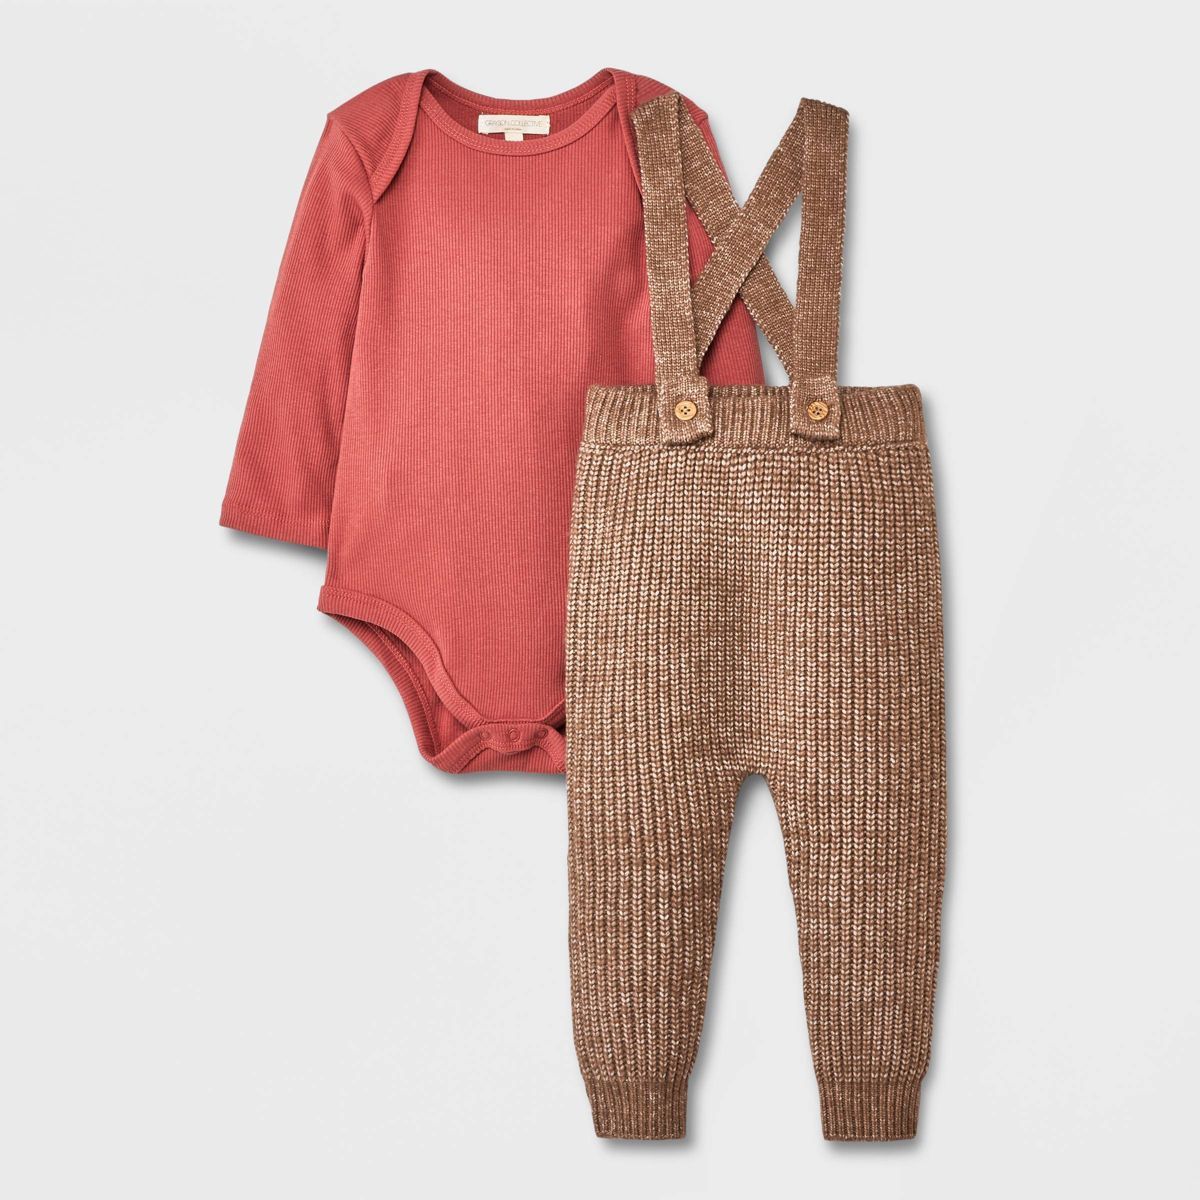 Grayson Collective Baby Solid 2pc Top & Bottom Set - Red | Target